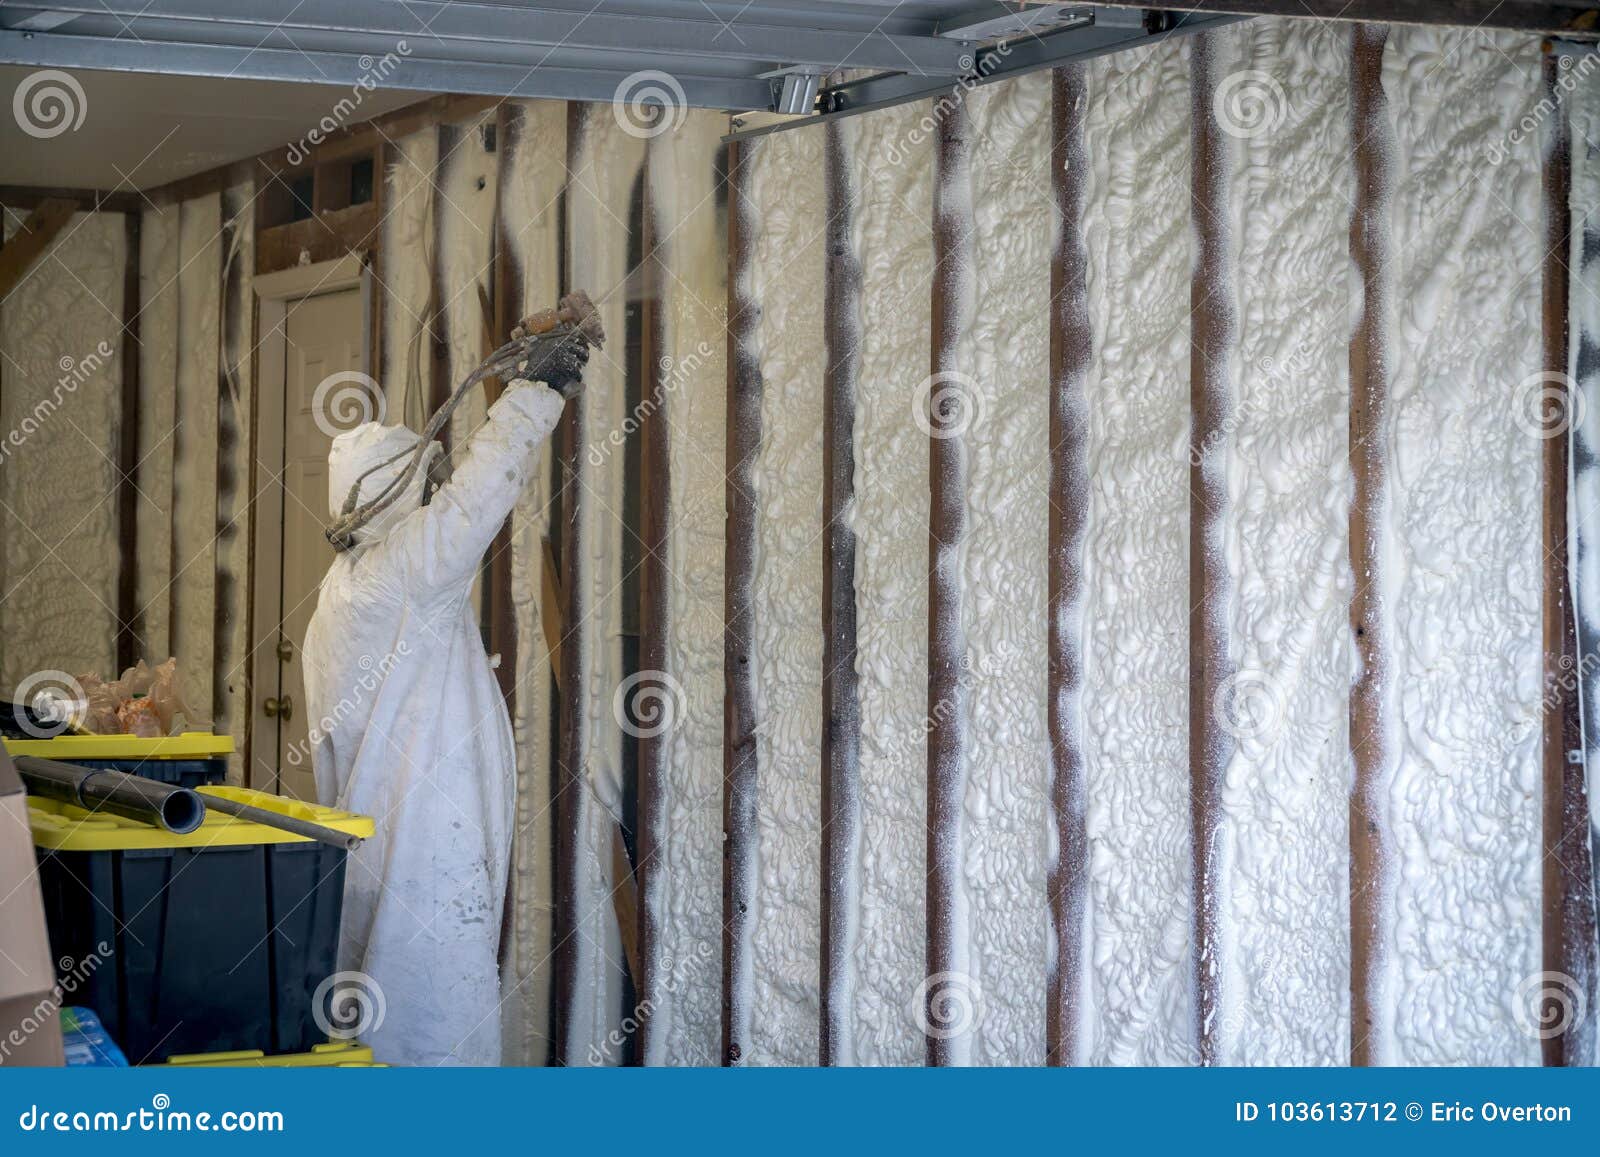 worker spraying closed cell spray foam insulation on a home wall